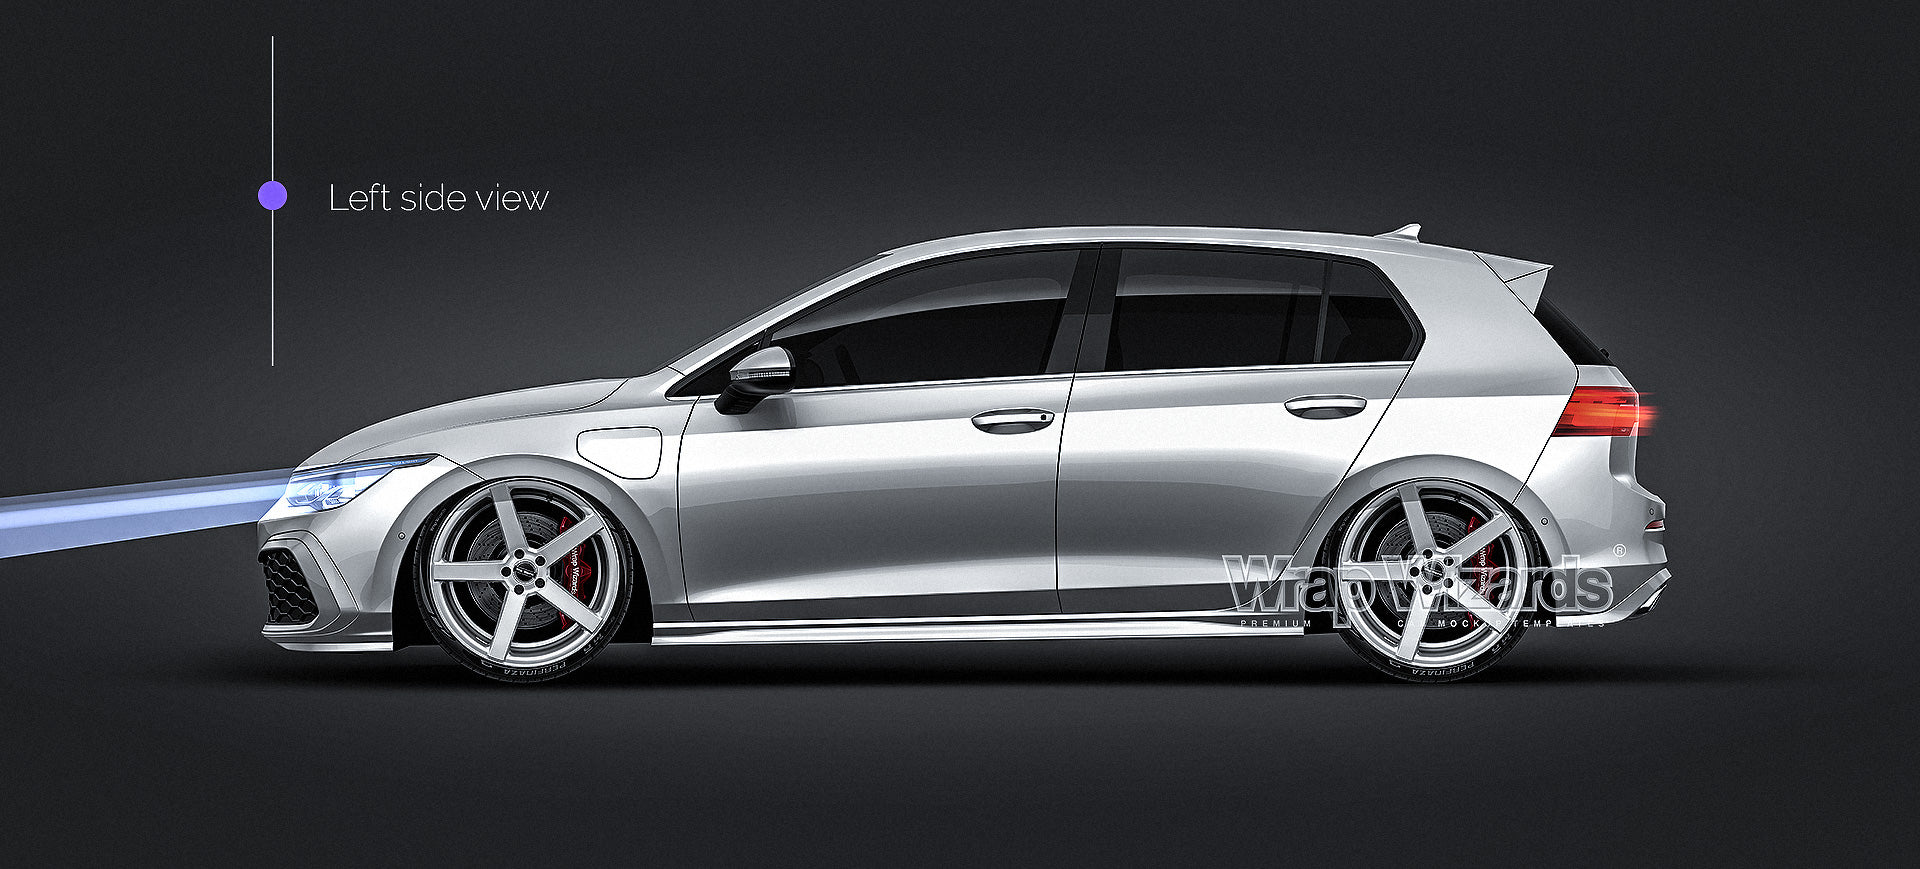 Volkswagen Golf MK8 GTE 2020 glossy finish - all sides Car Mockup Template.psd